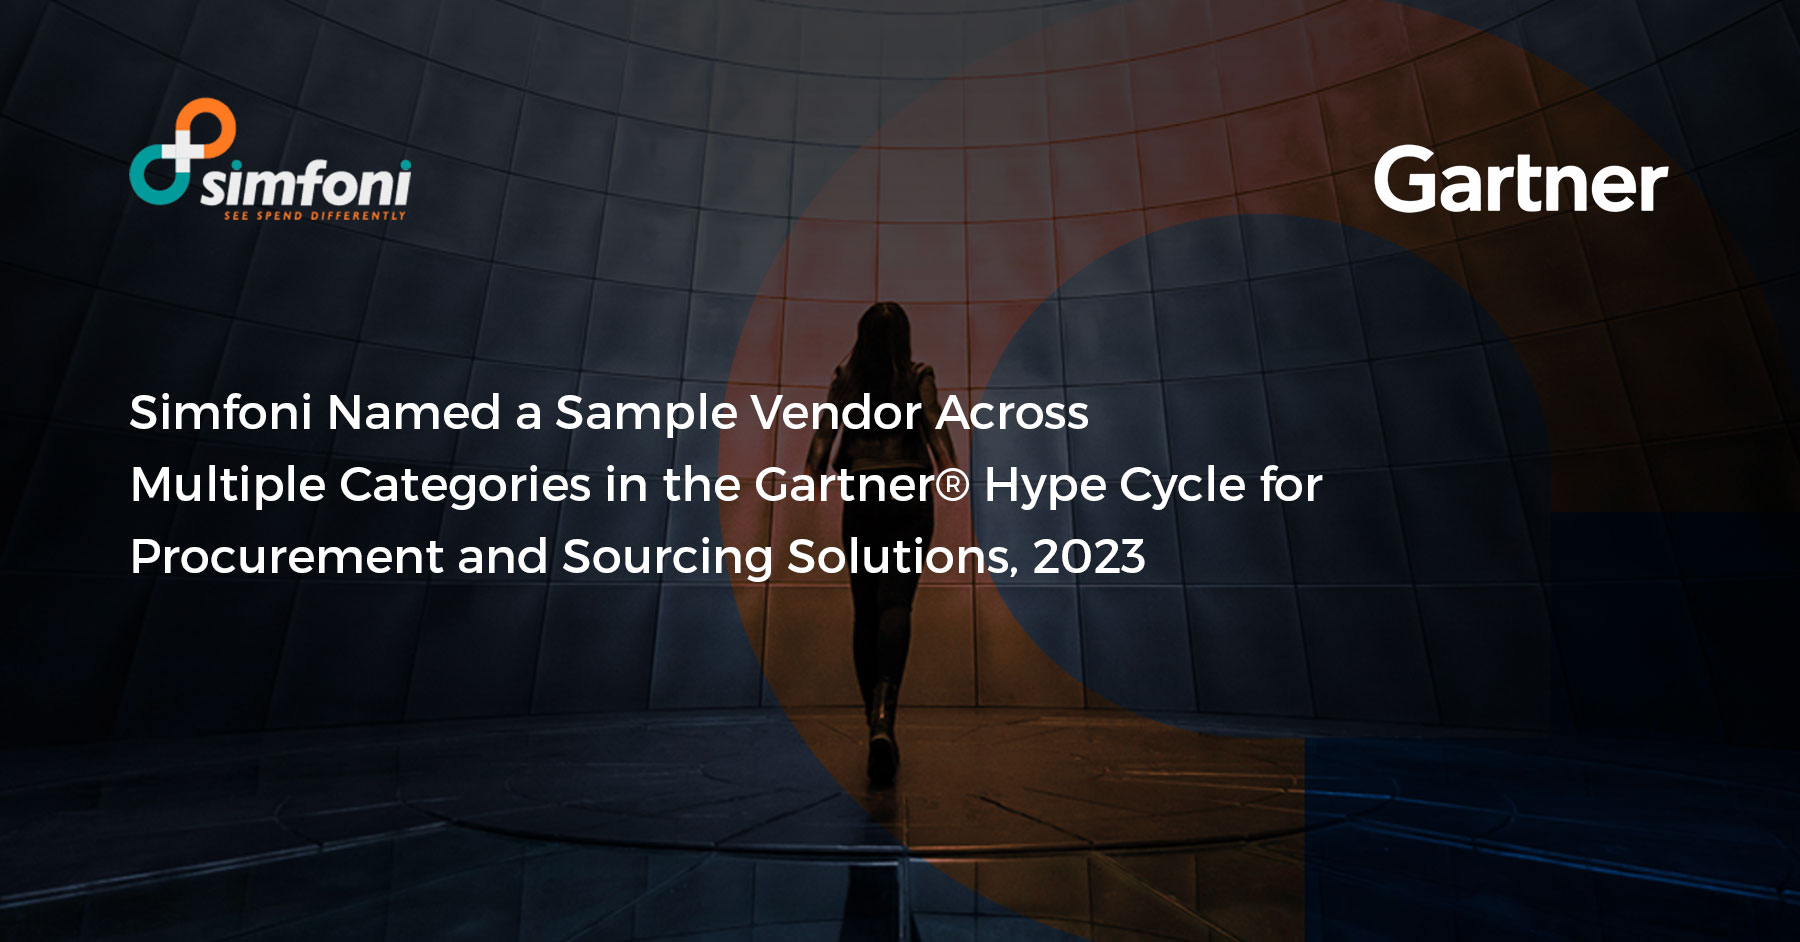 Simfoni Named a Sample Vendor Across Multiple Categories in the Gartner® Hype Cycle for Procurement and Sourcing Solutions, 2023